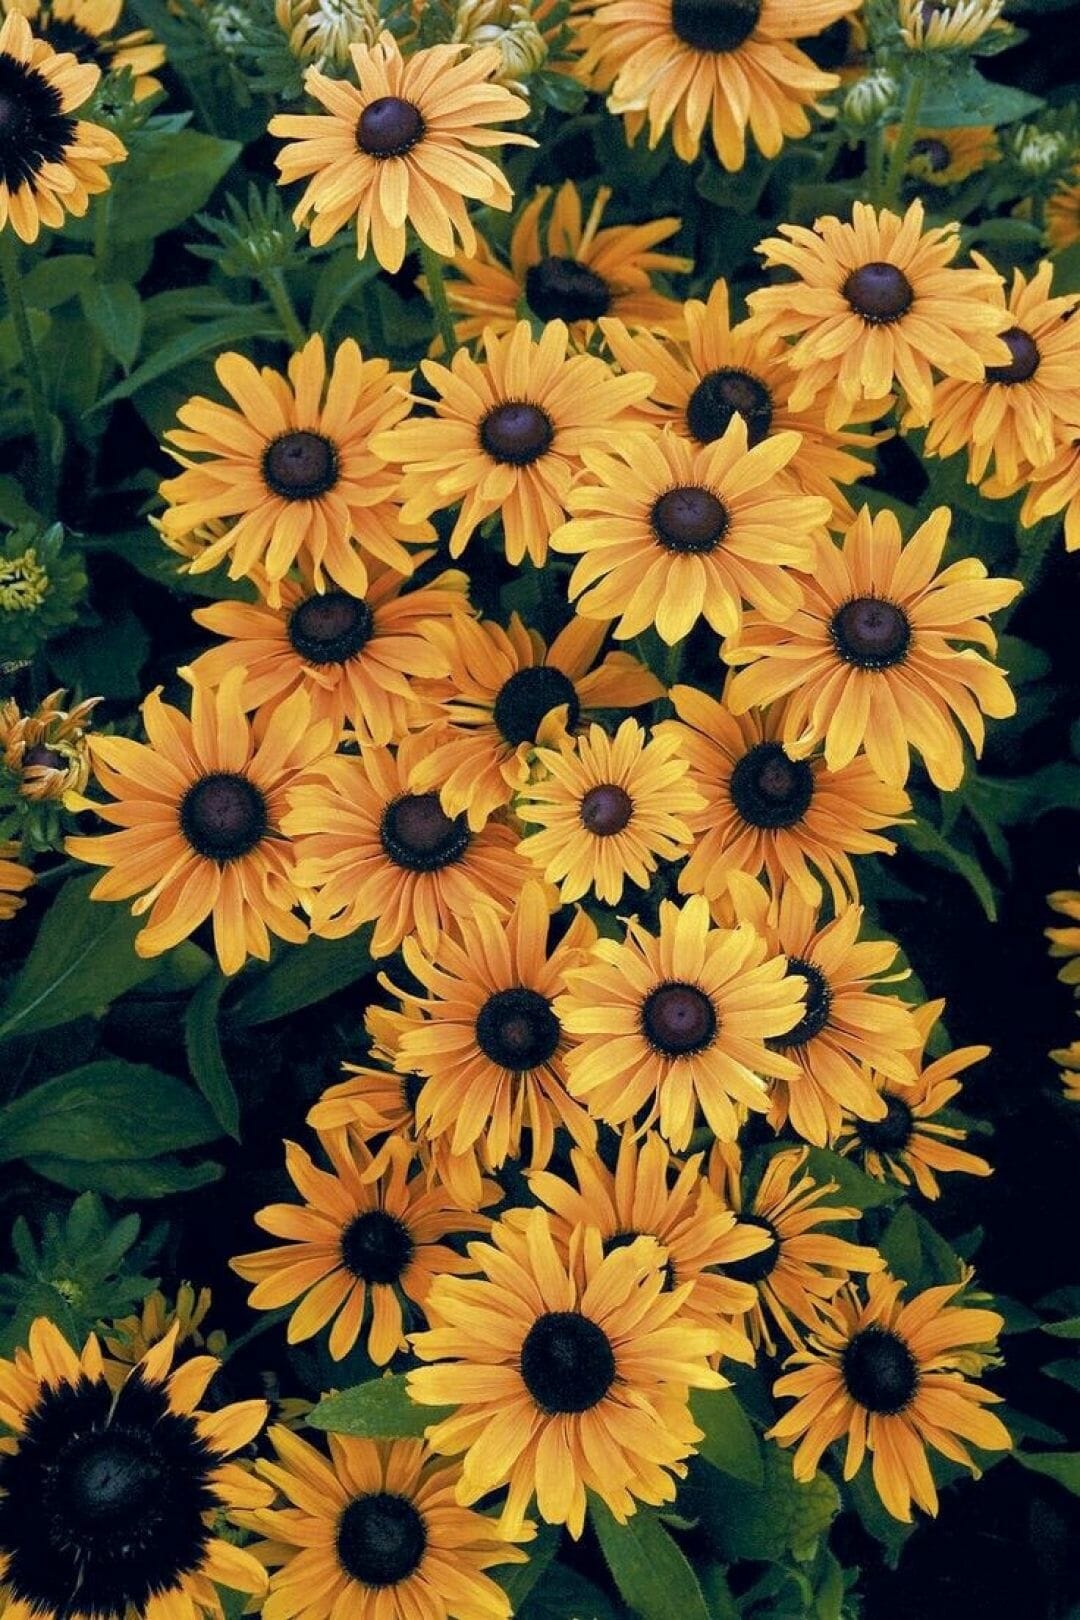 Yellow Aesthetic Sunflowers HD Wallpaper (Desktop Background / Android / iPhone) (1080p, 4k) (1080x1620)